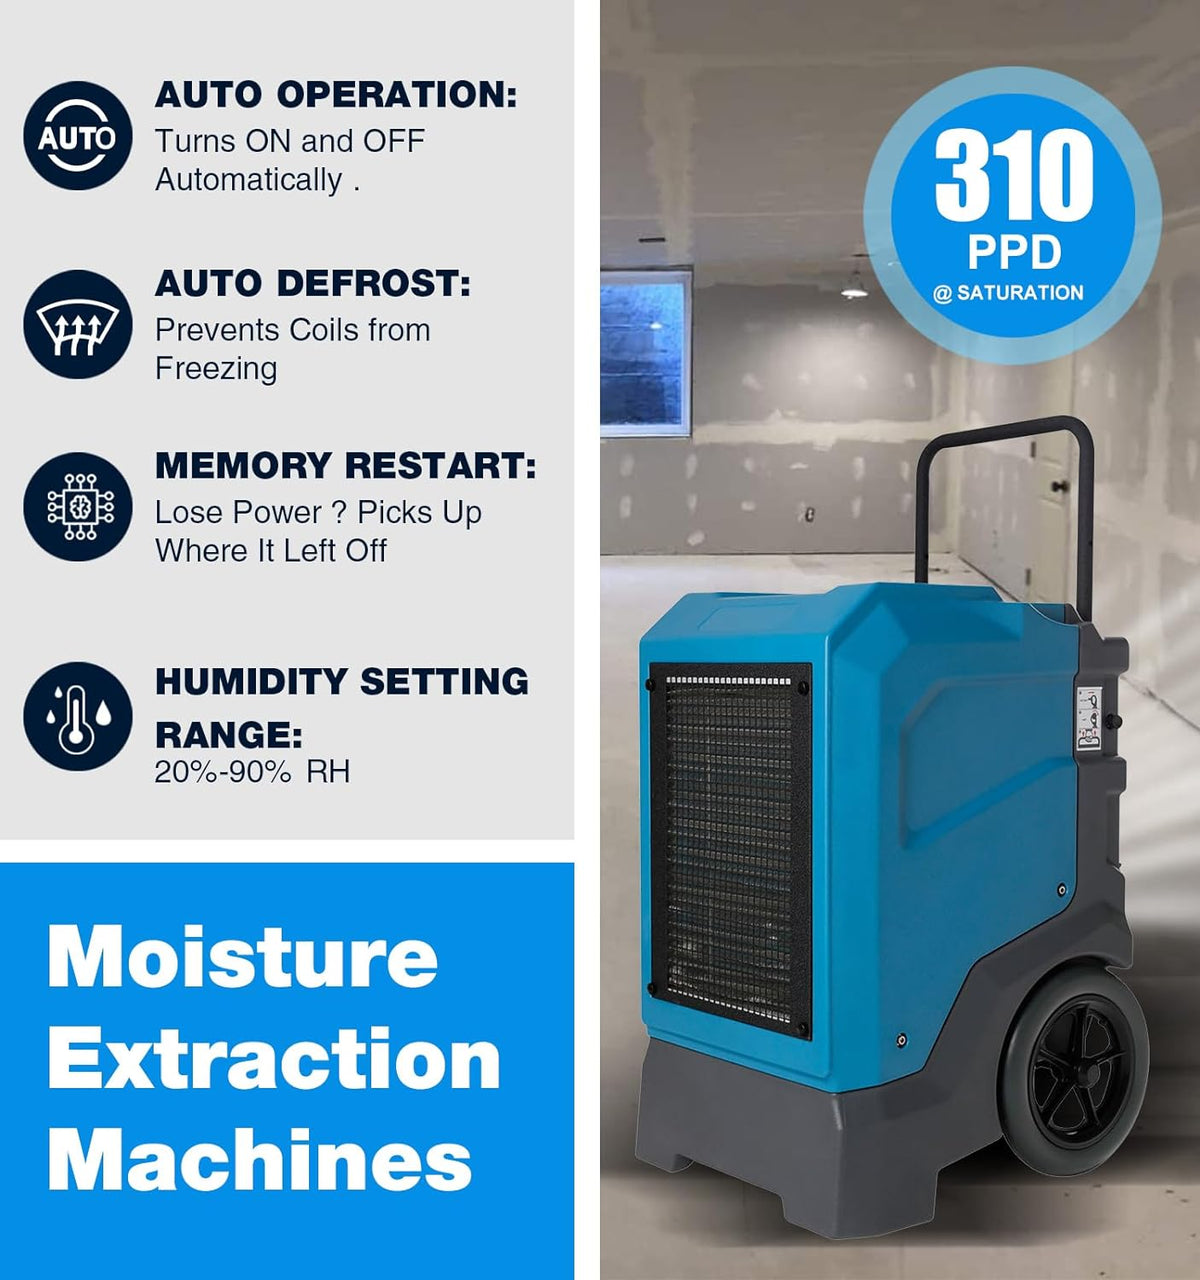 Mounto MOUNTO 310Pints LGR Commercial Dehumidifier with Pump and Drain Hose, Bluetooth, LGR Portable Dehumidifier with wheels for Home, Basements, Garages, and Job Sites.…